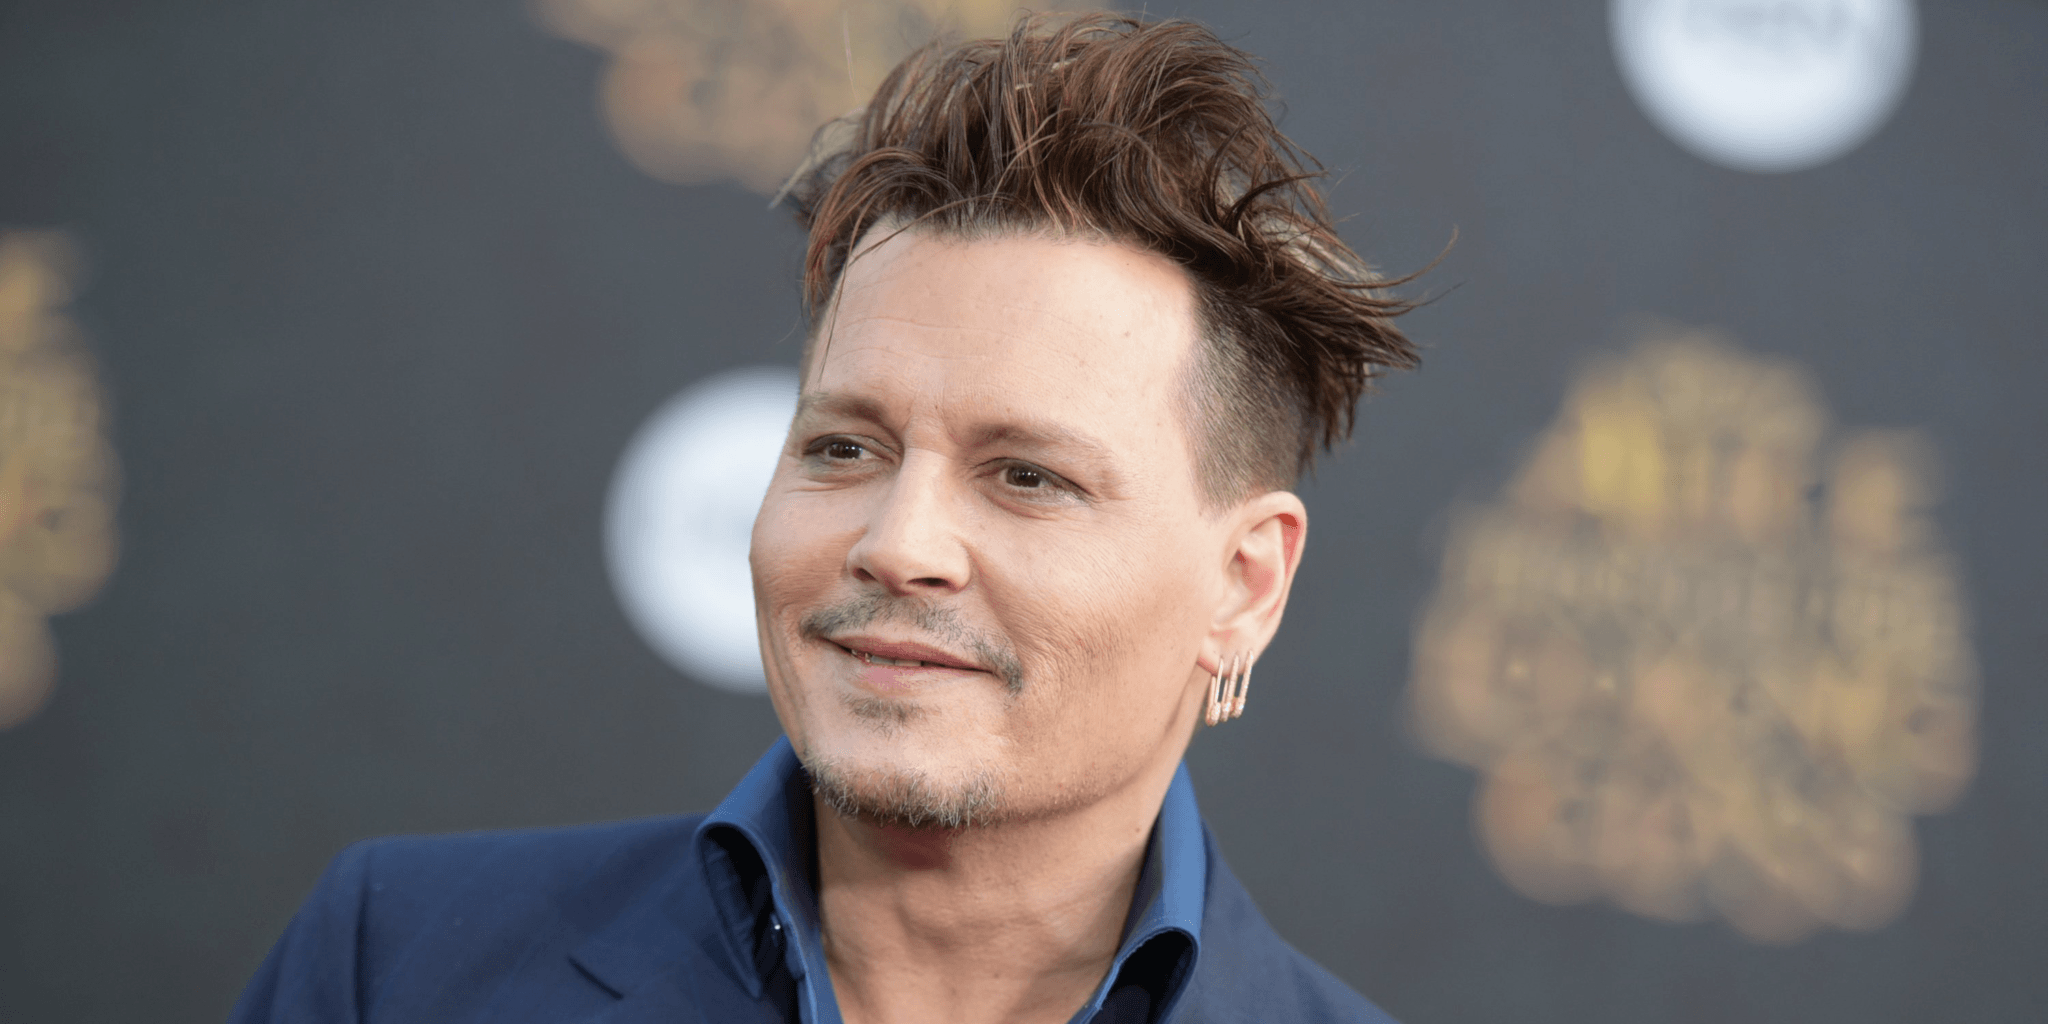 Fans Question Johnny Depp's Role in 'Fantastic Beasts 2' After